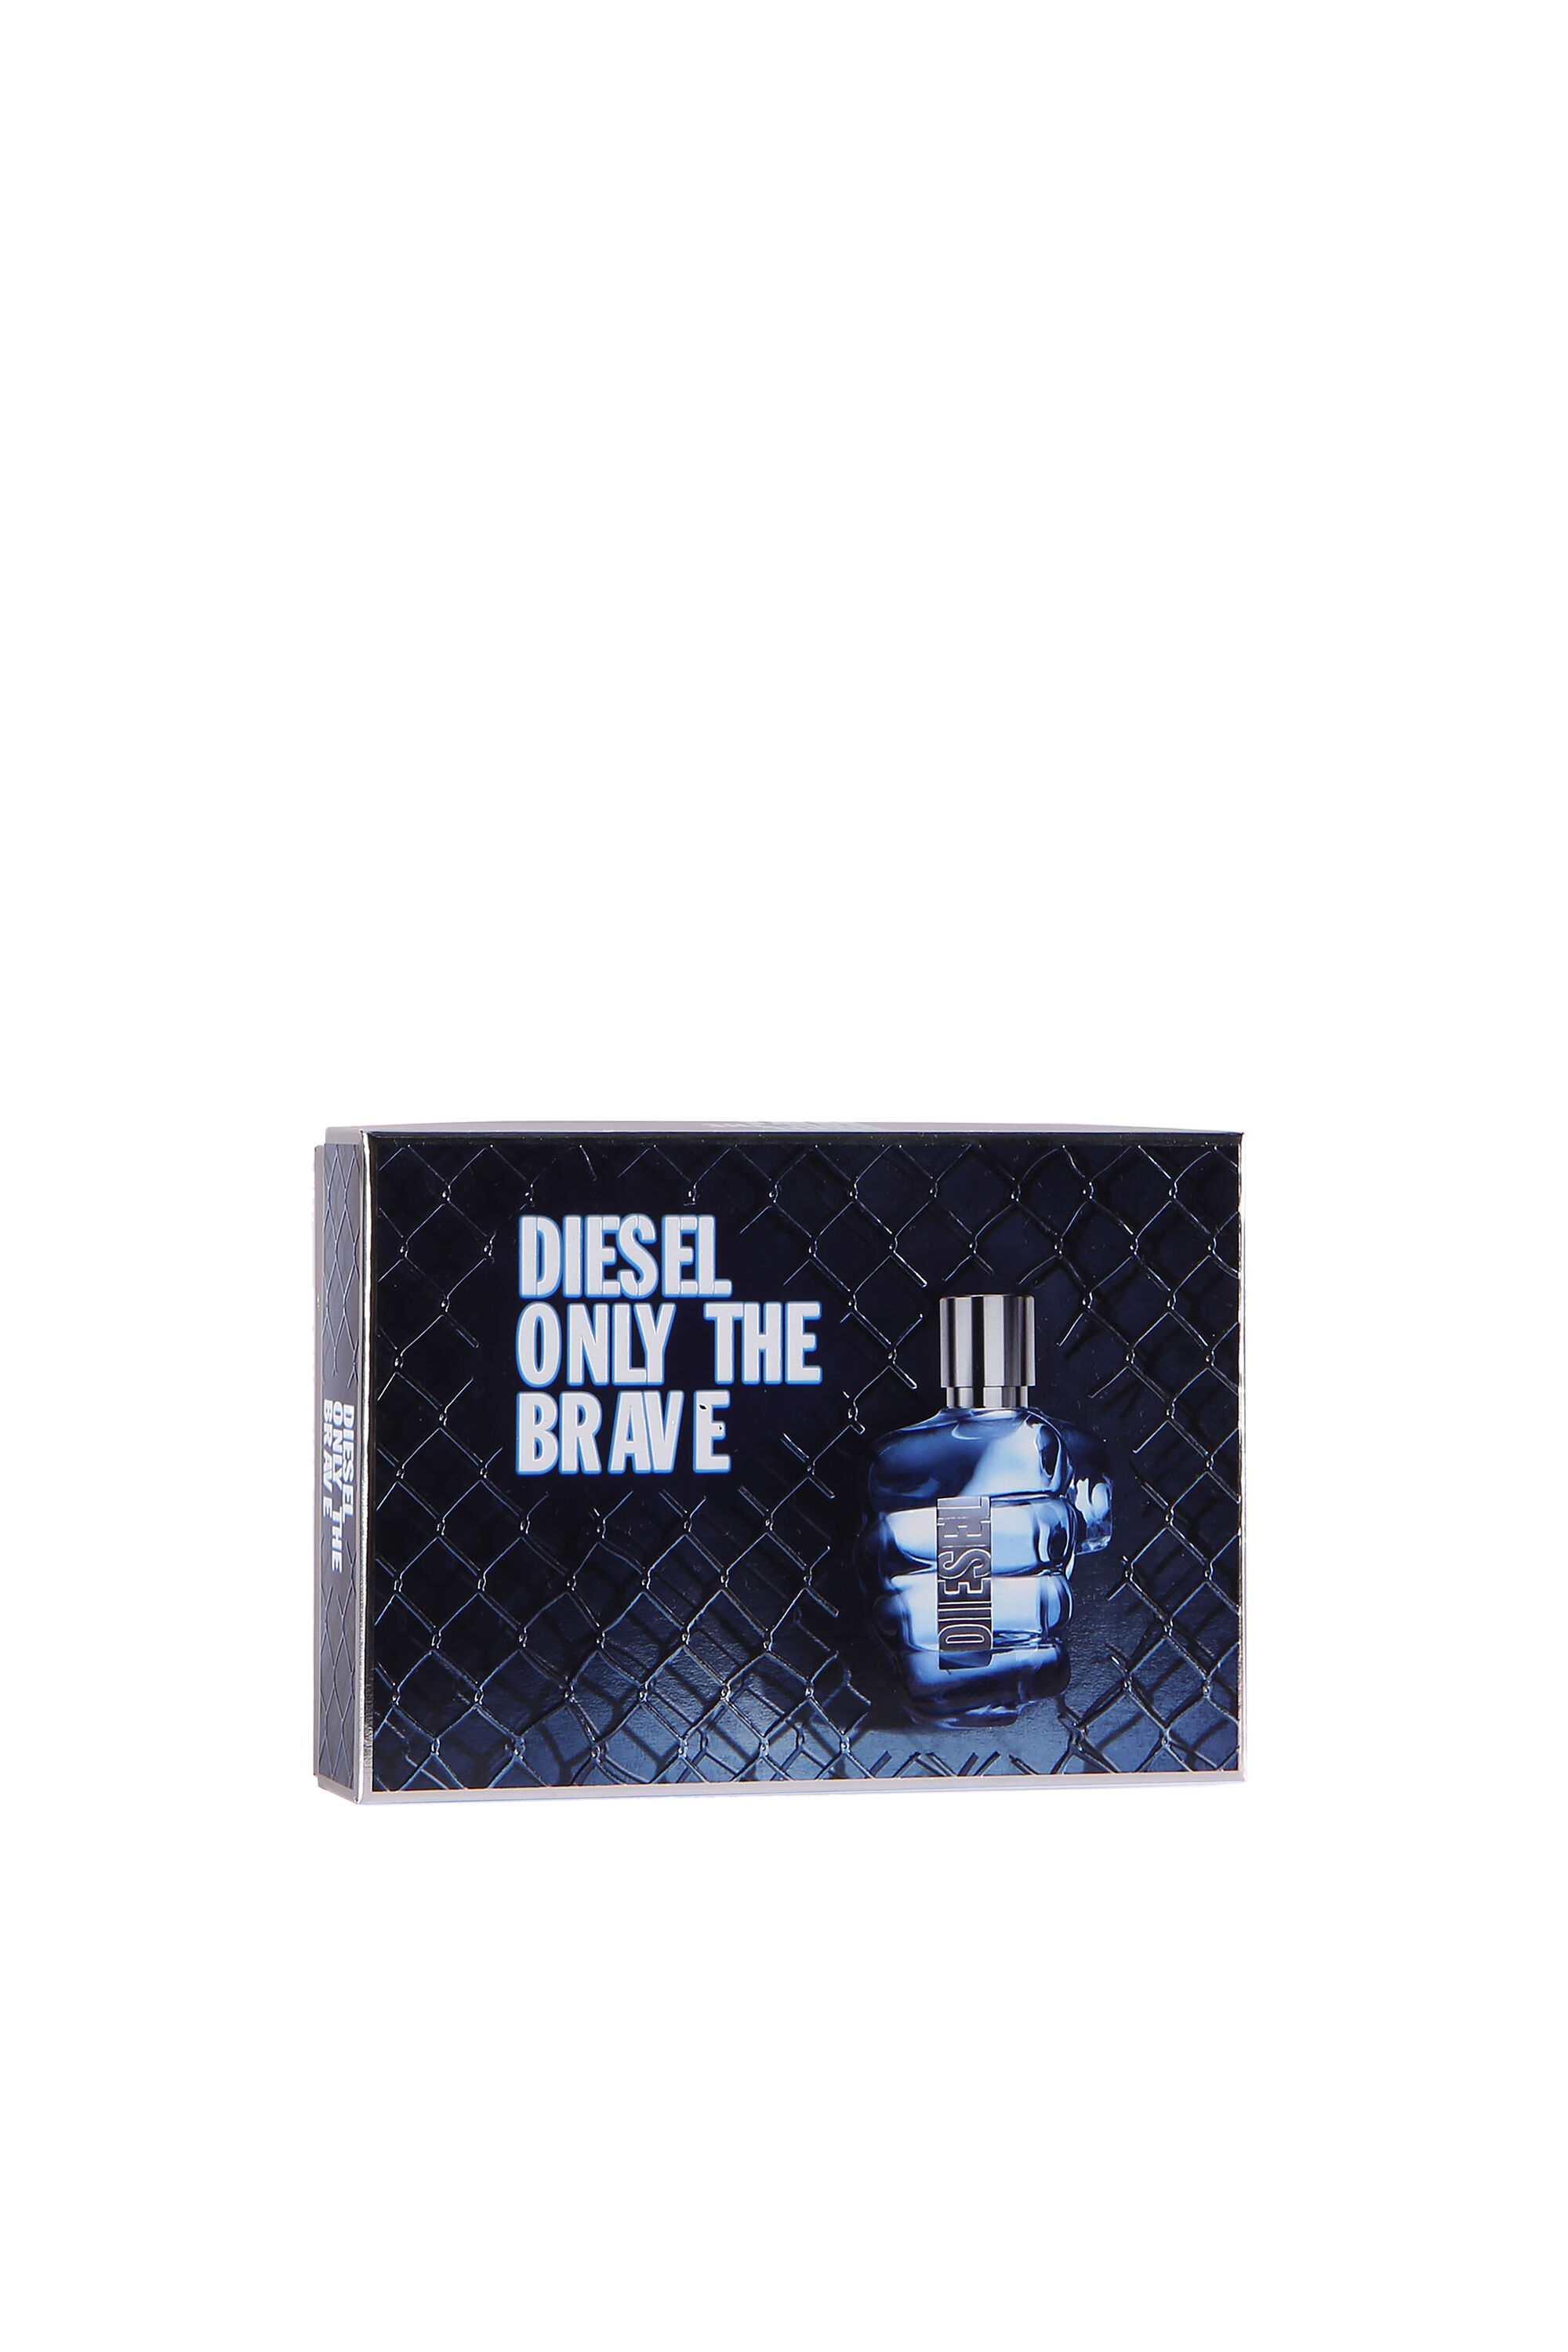 Diesel - ONLY THE BRAVE 35ML GIFT SET,  - Image 1